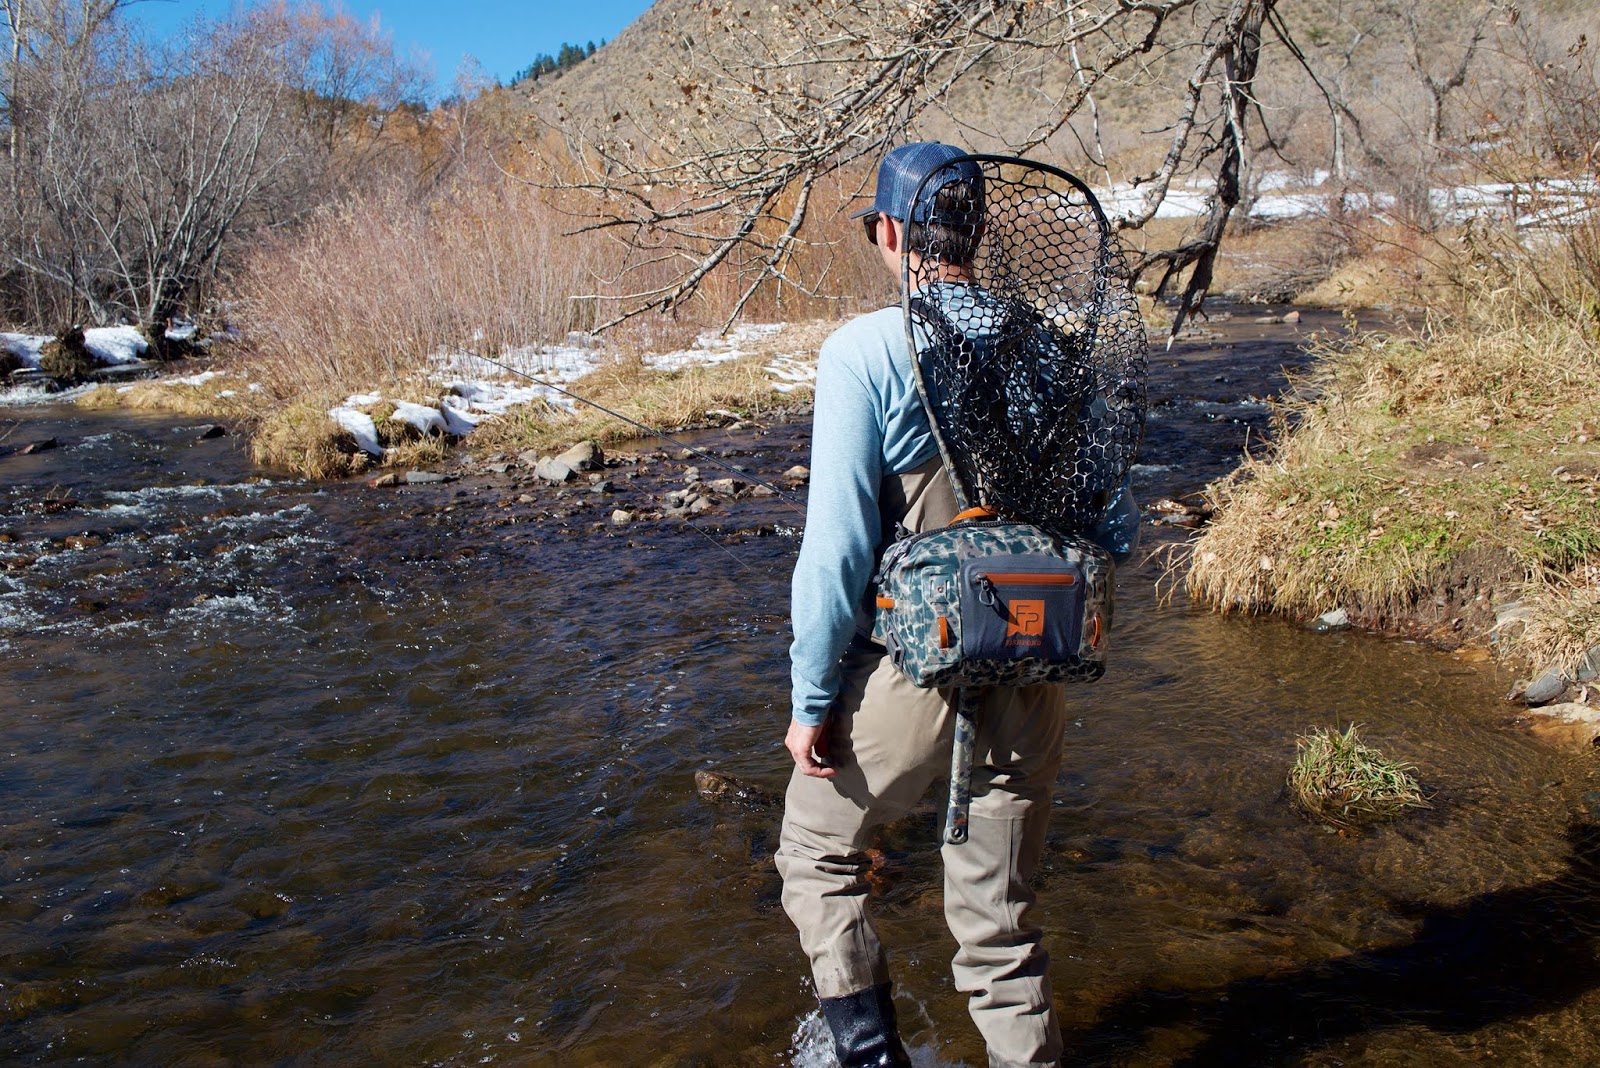 Gorge Fly Shop Blog: Fishpond Thunderhead Submersible Lumbar Riverbed Camo